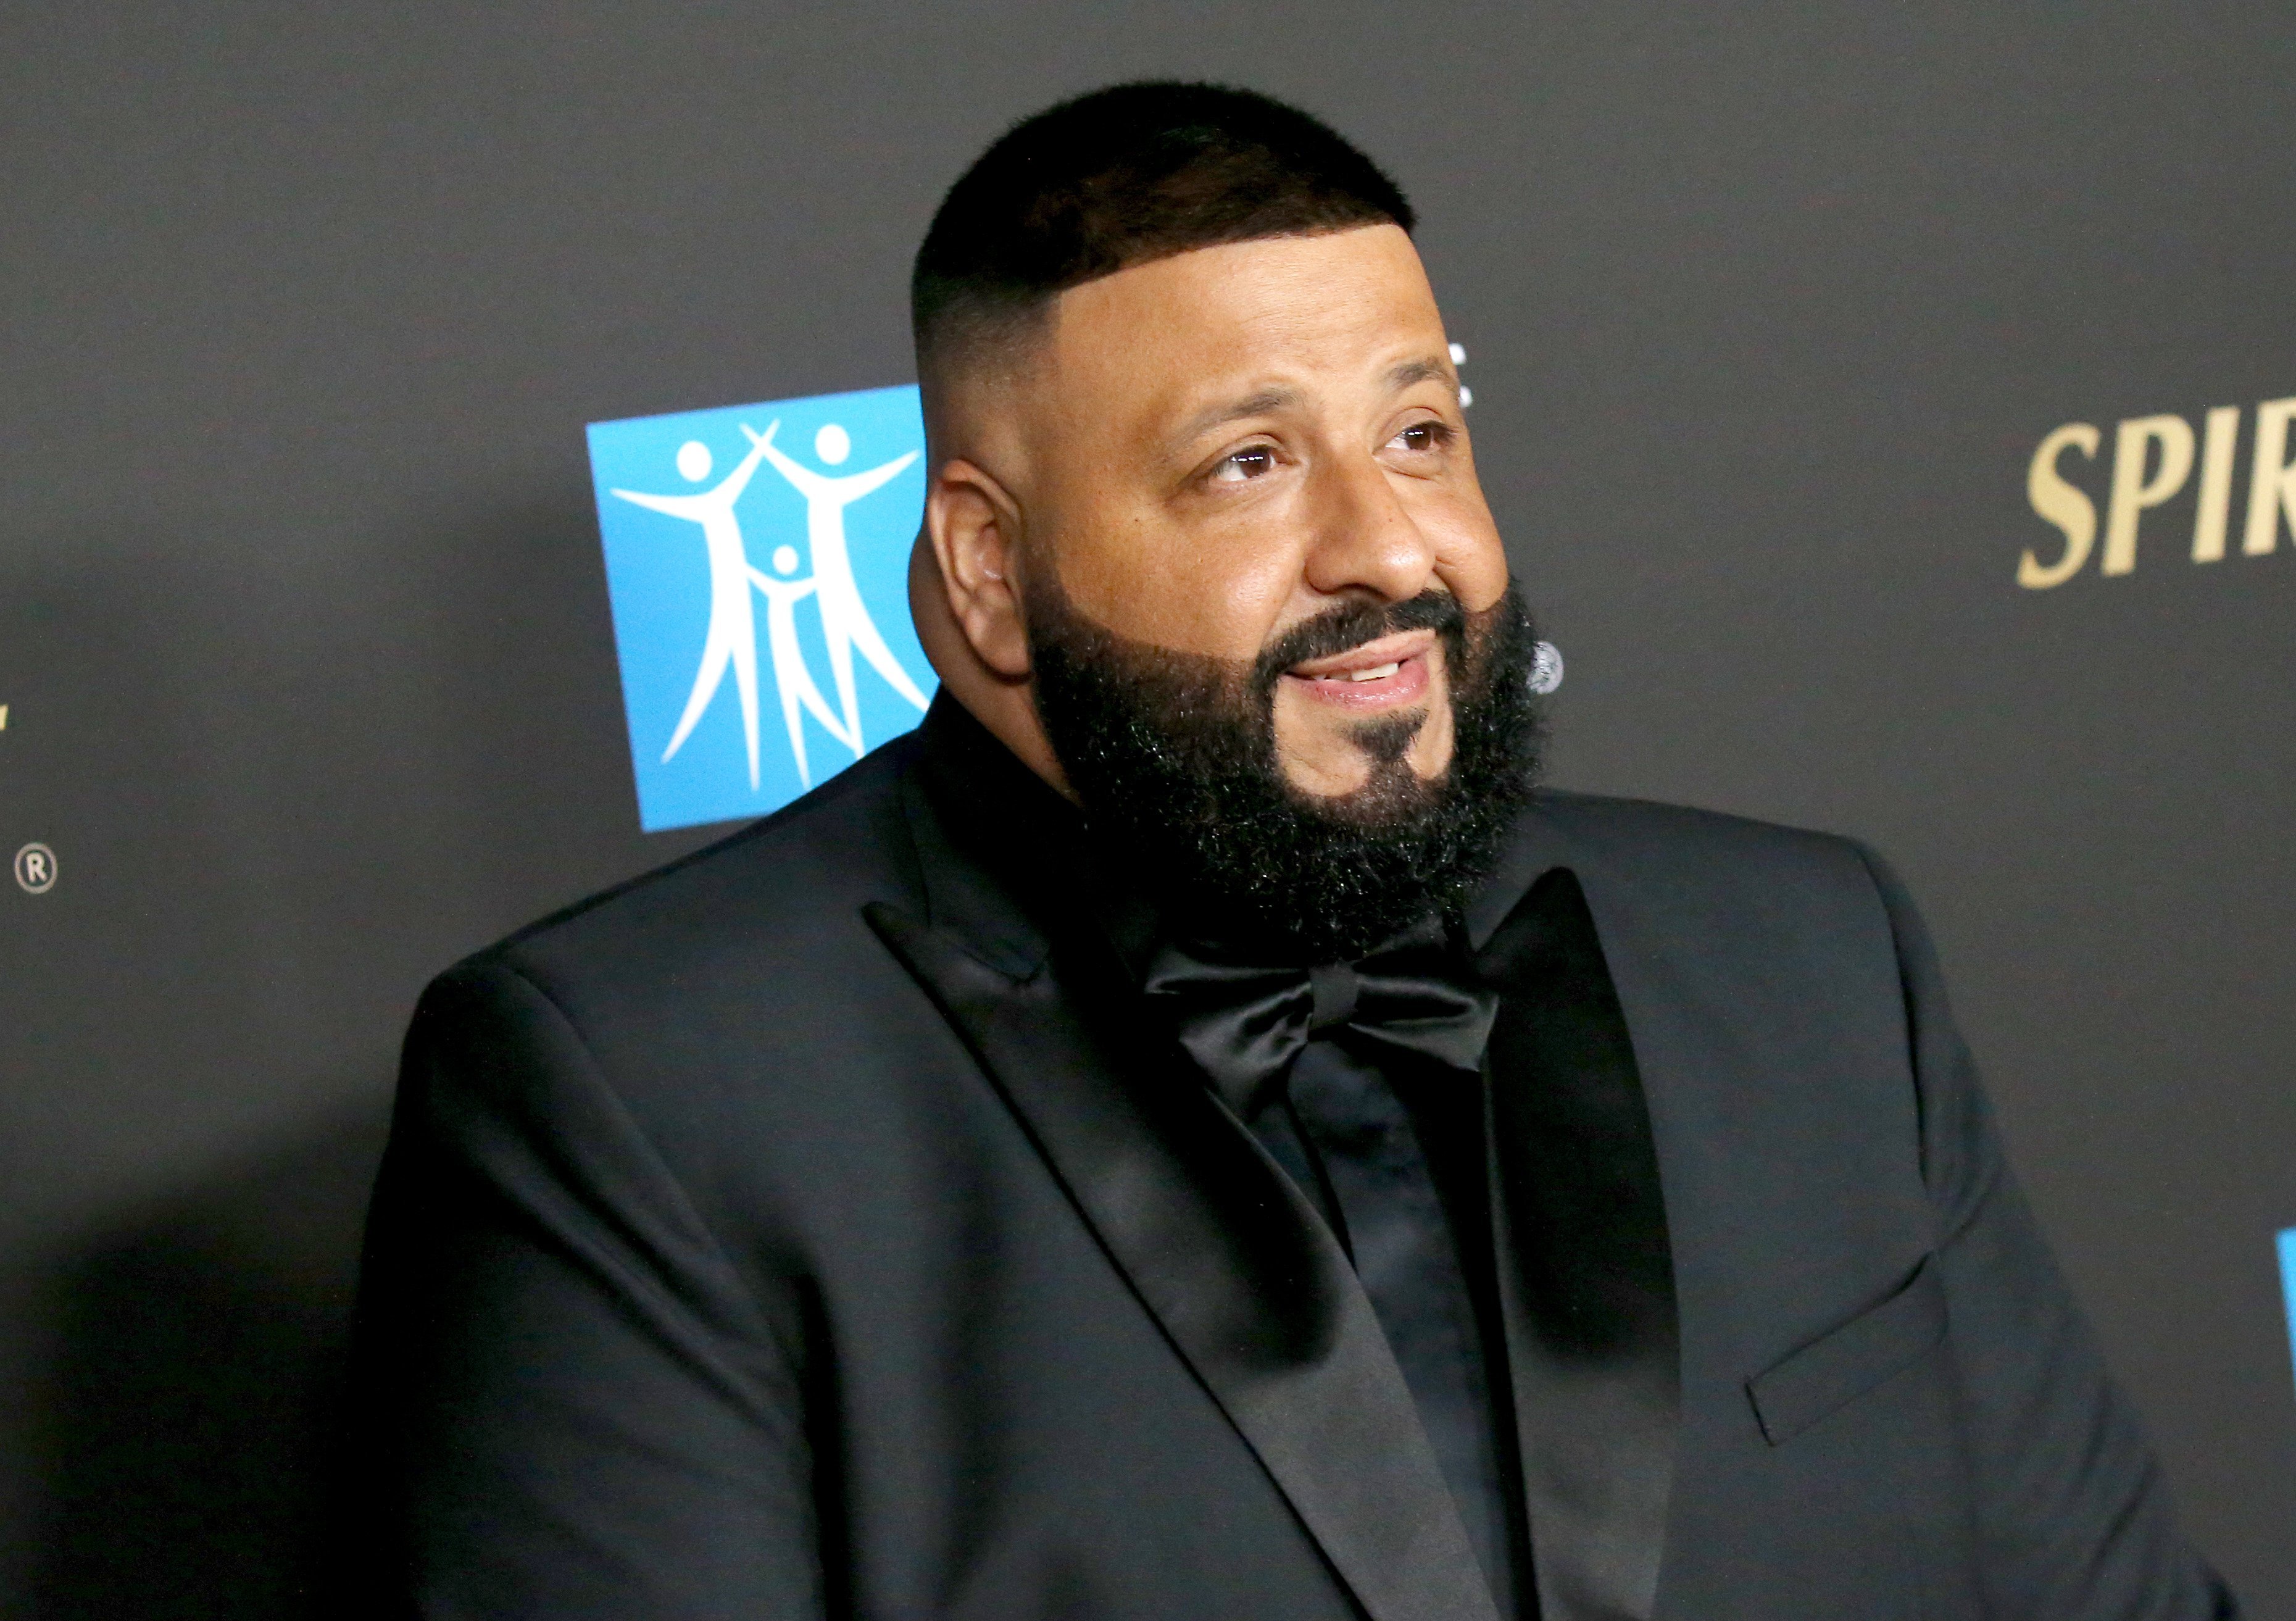 DJ Khaled attends the City Of Hope's Spirit of Life 2019 Gala held at The Barker Hanger on October 10, 2019 | Photo: GettyImages